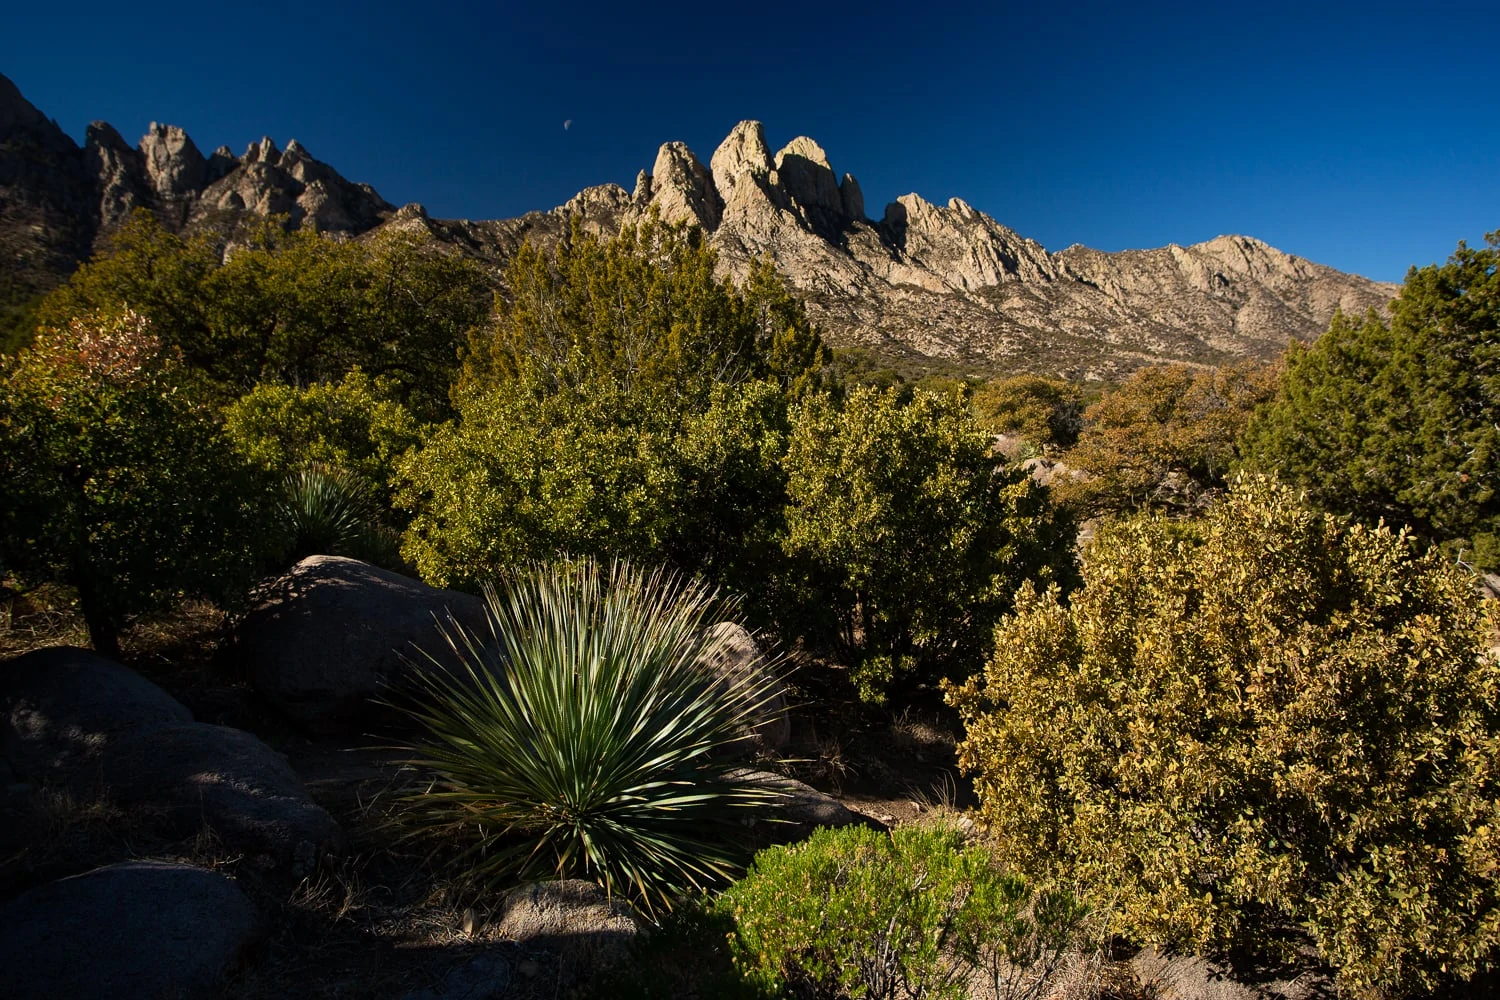 A mountain peak in New Mexico is surrounded by green desert plants and the moon is visible over the horizon.